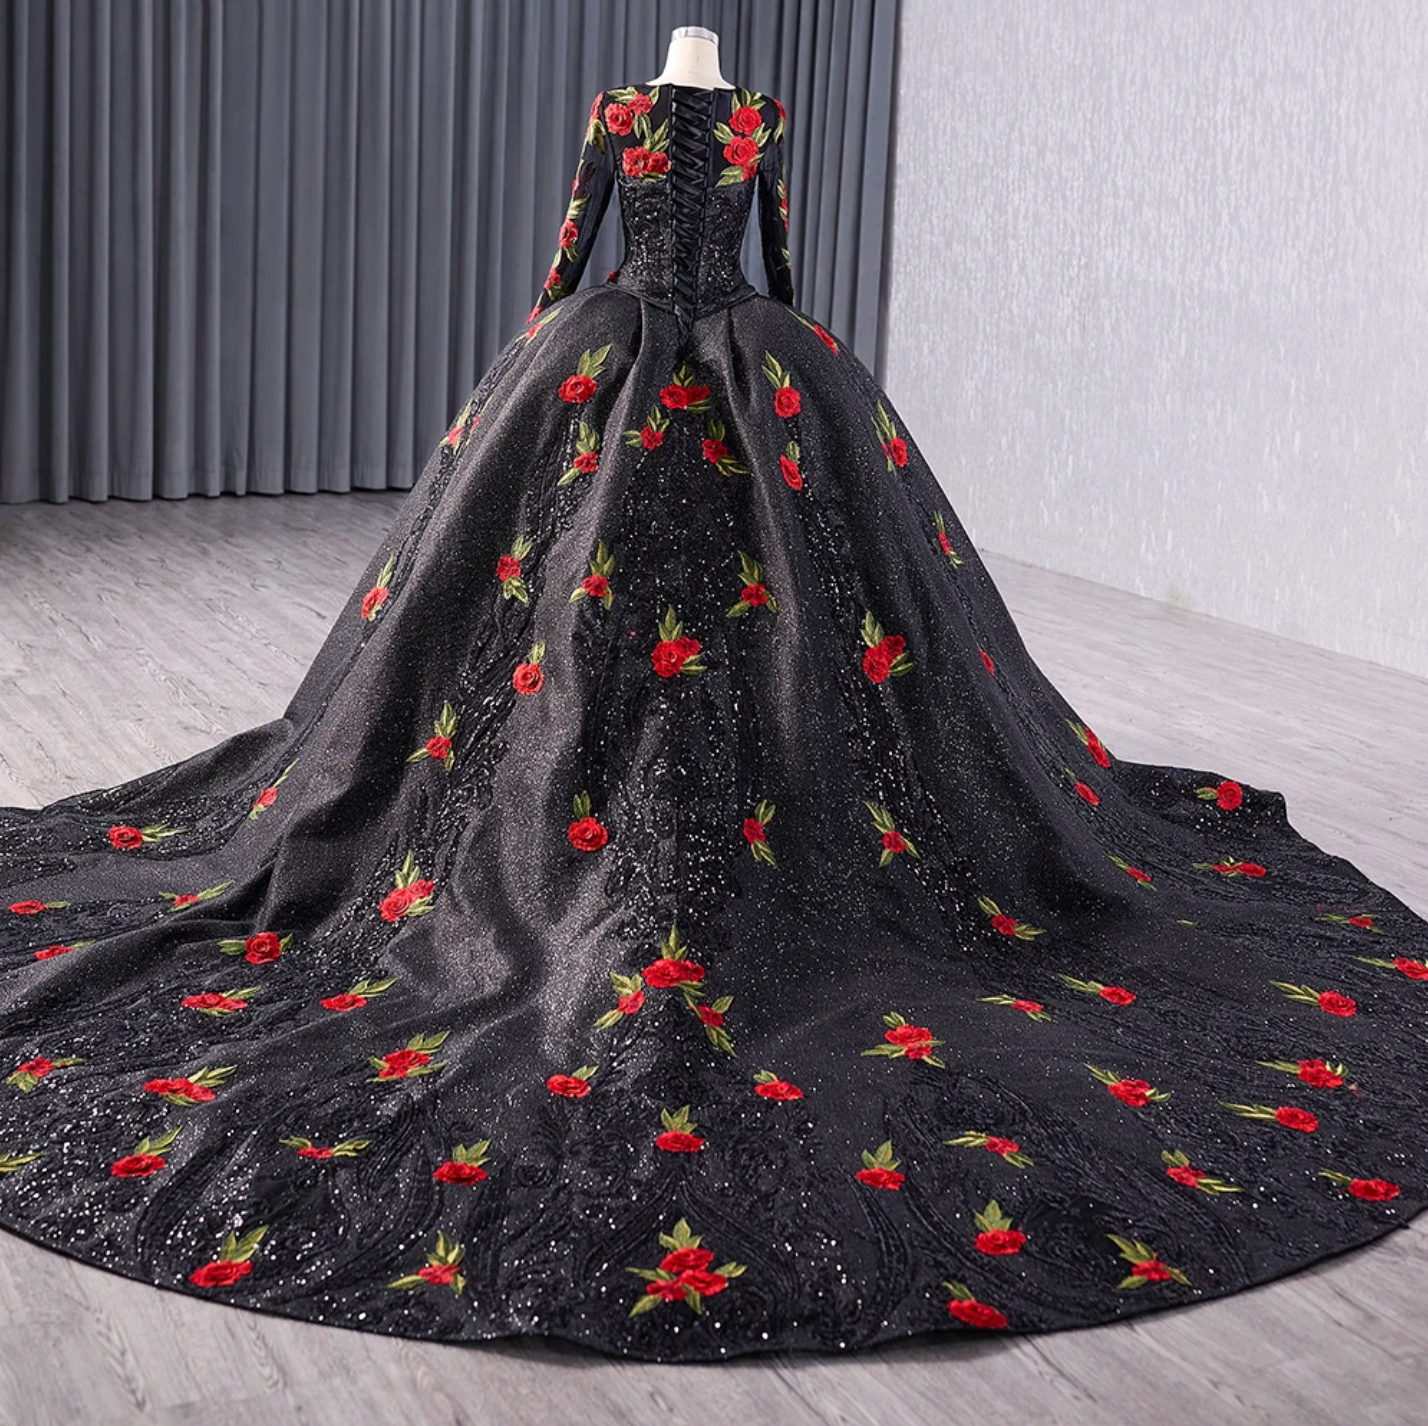 Red Rose Black Quinceañera Ball Gown Dress